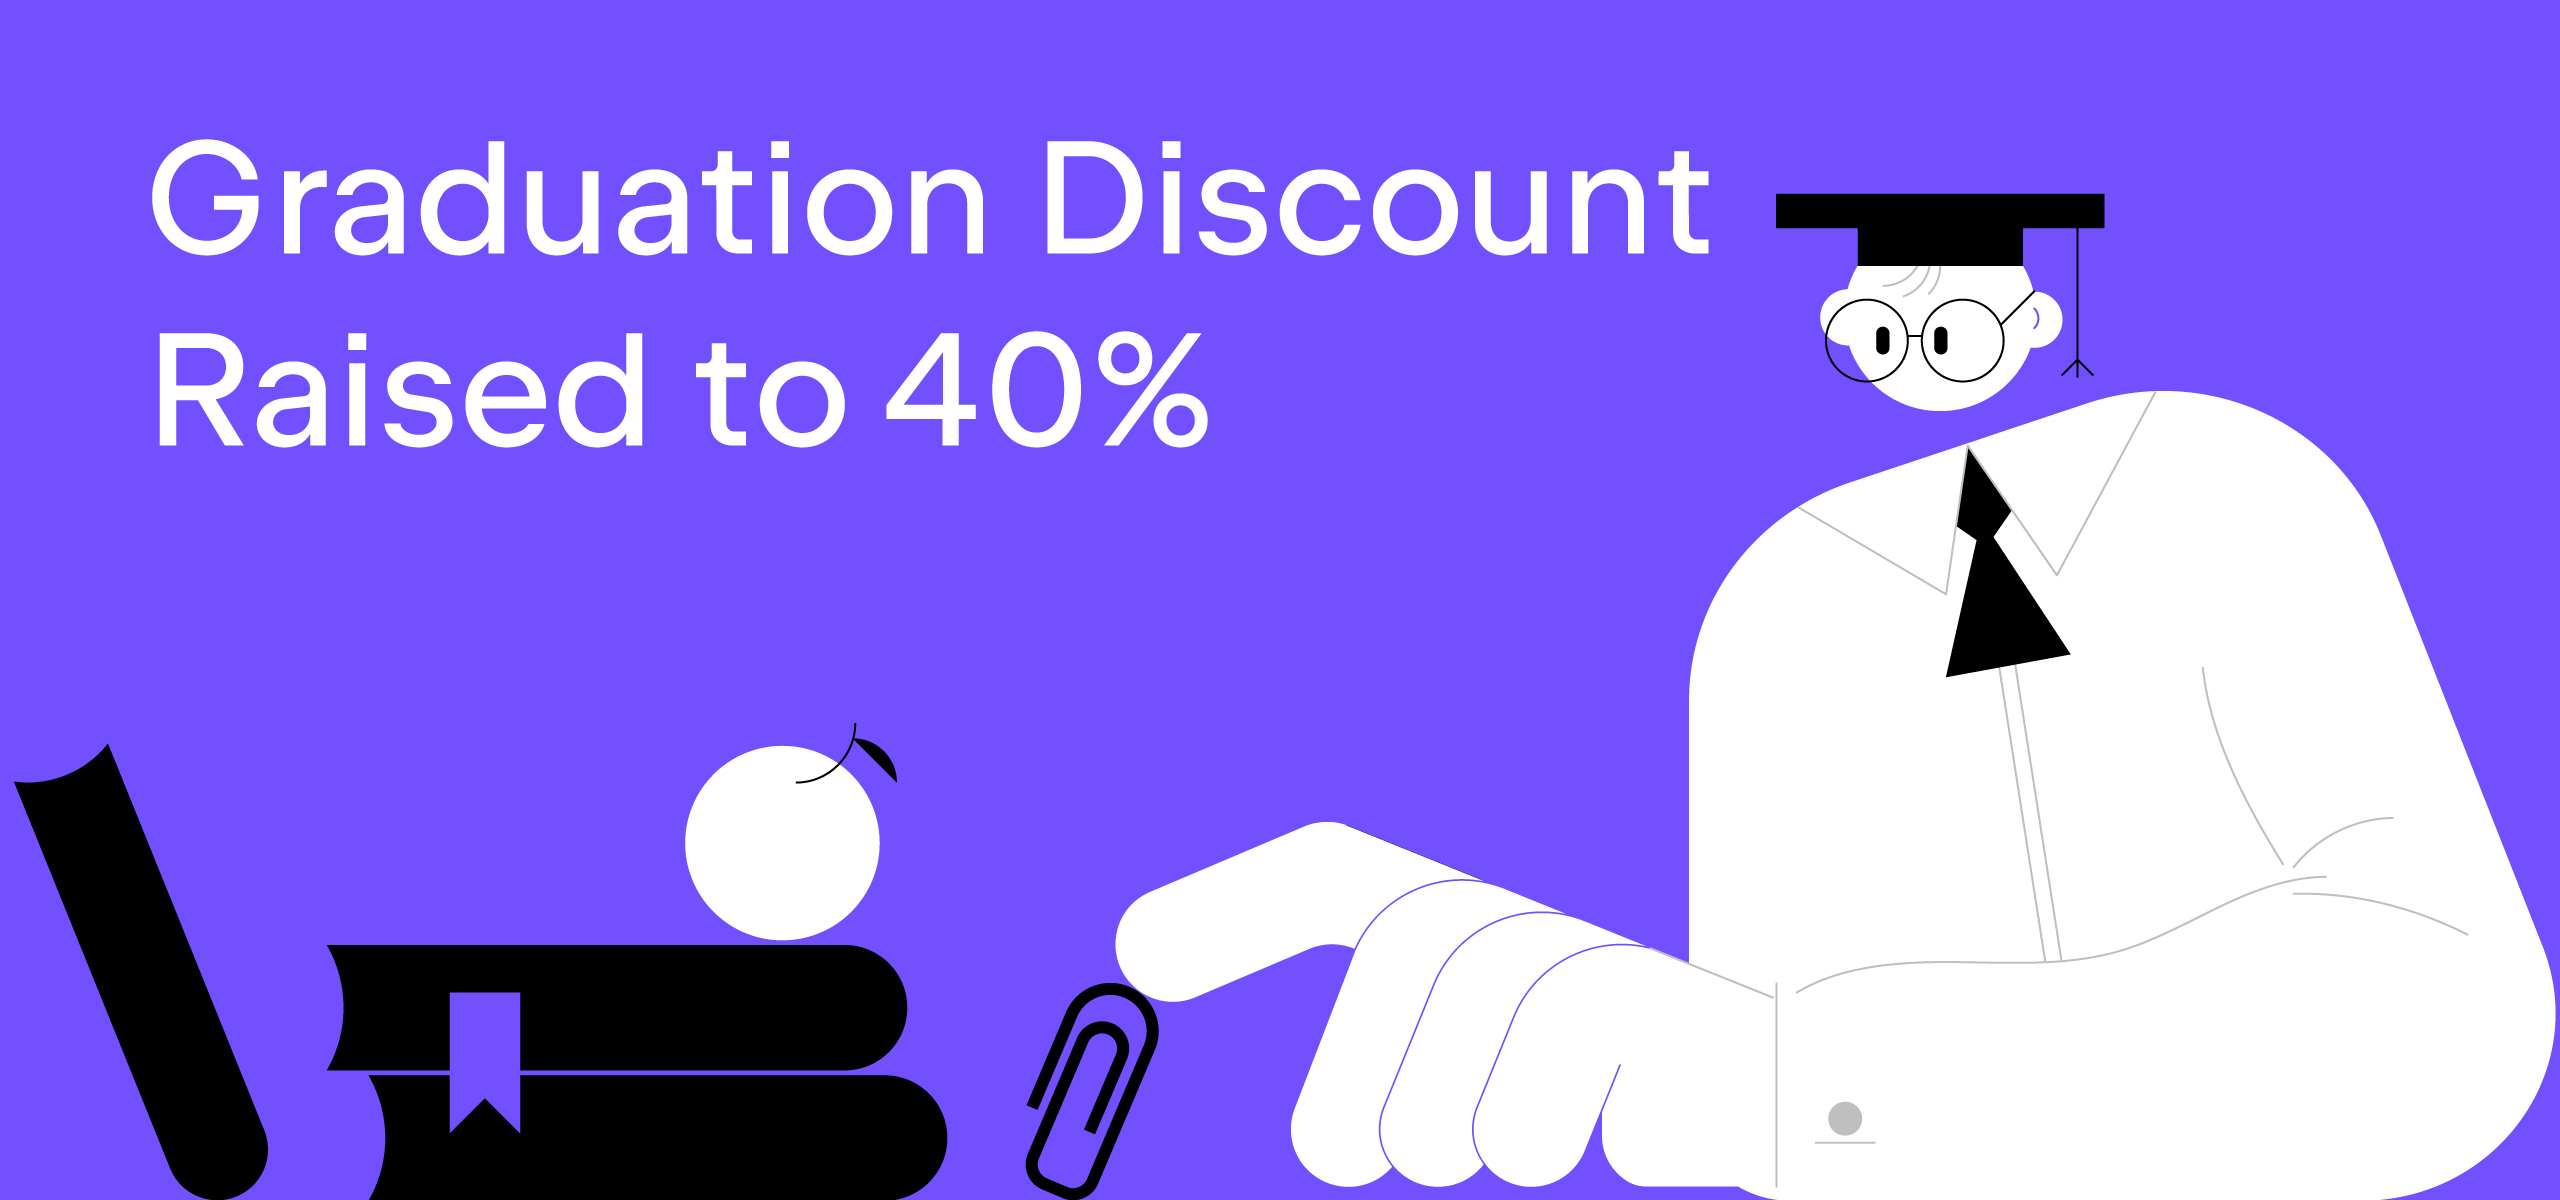 Discount for Former Students Increased From 25% to 40% | The JetBrains for Education Blog